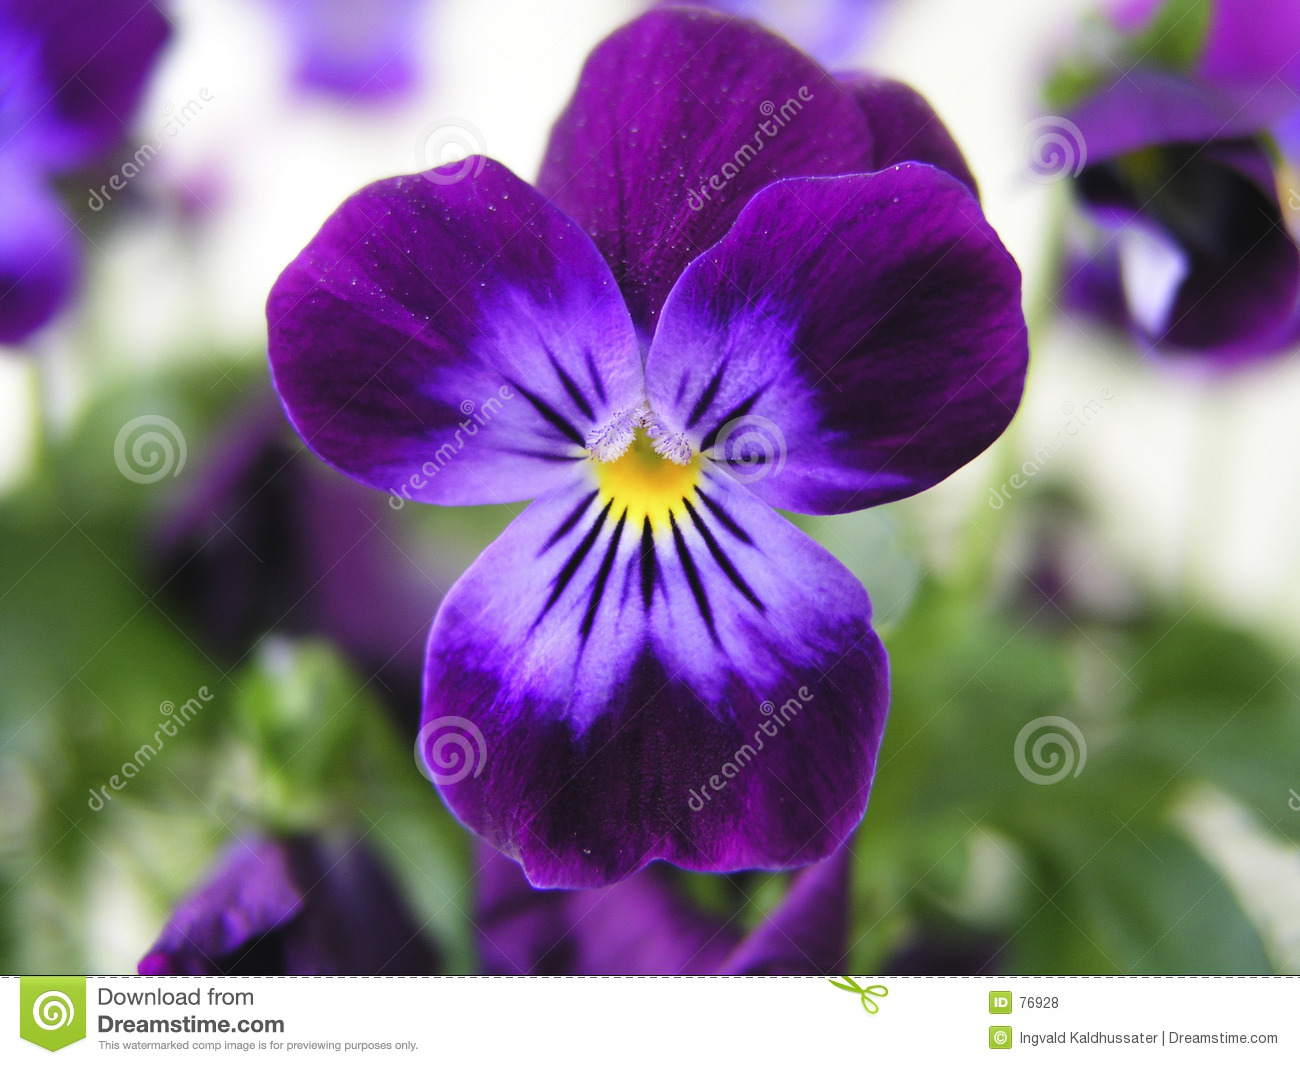 awesome hd pansy flower image